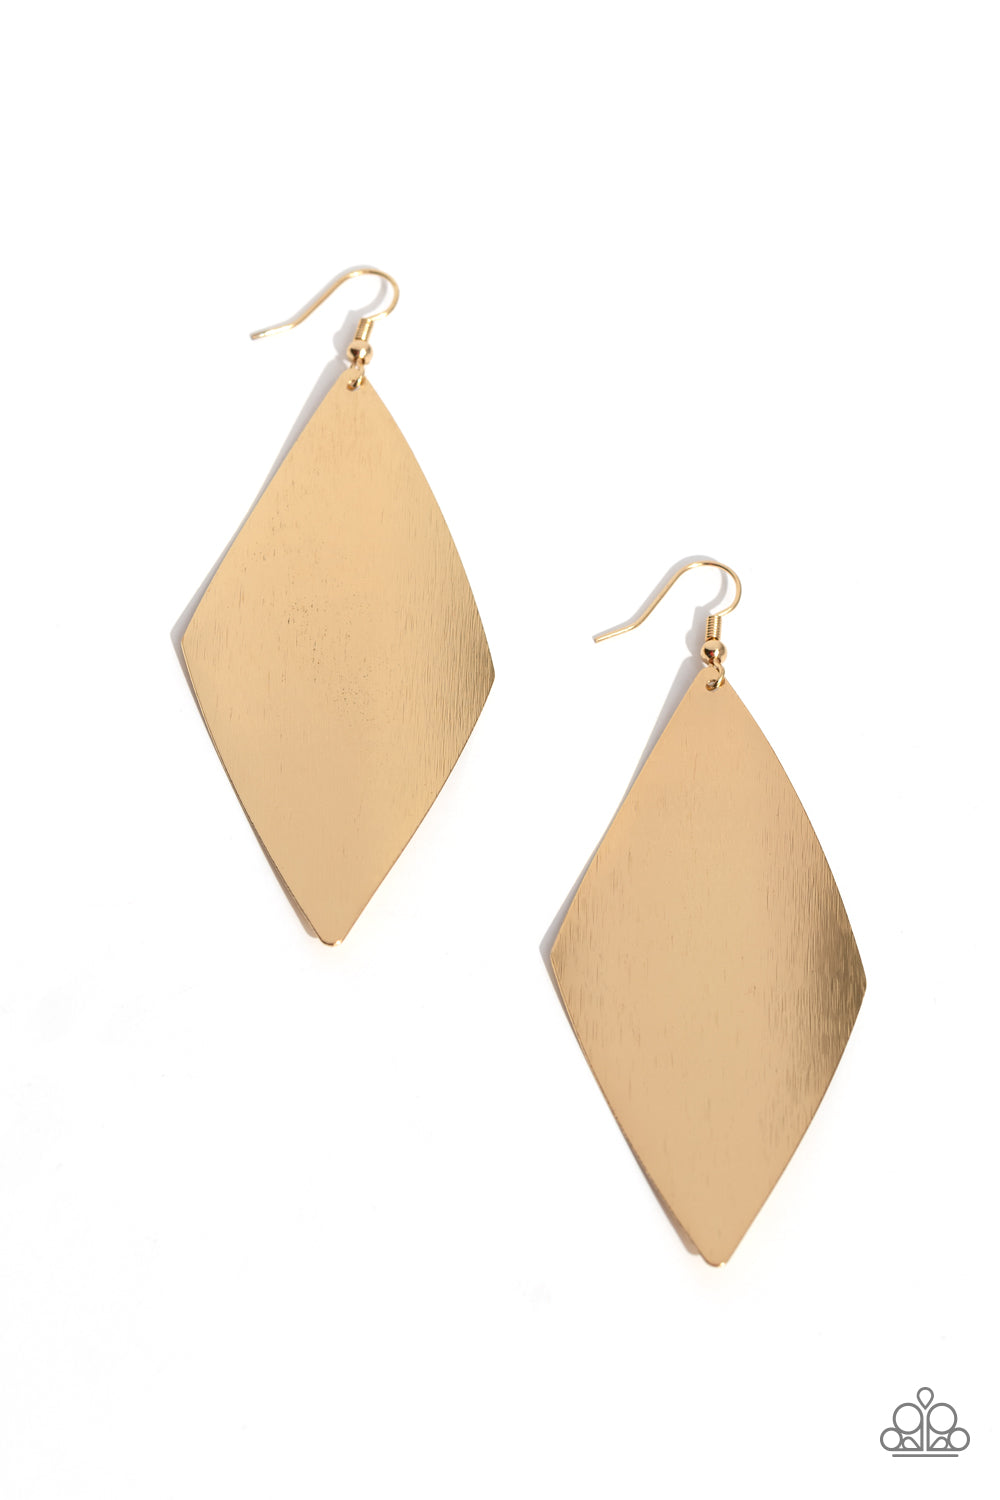 Retro Rally Gold Earring - Paparazzi Accessories  Etched in shimmer, a kite-shaped gold frame delicately folds and ripples as it falls from the ear for an edgy vibe. Earring attaches to a standard fishhook fitting.  Sold as one pair of earrings.  Sku:  P5ED-GDXX-086XX